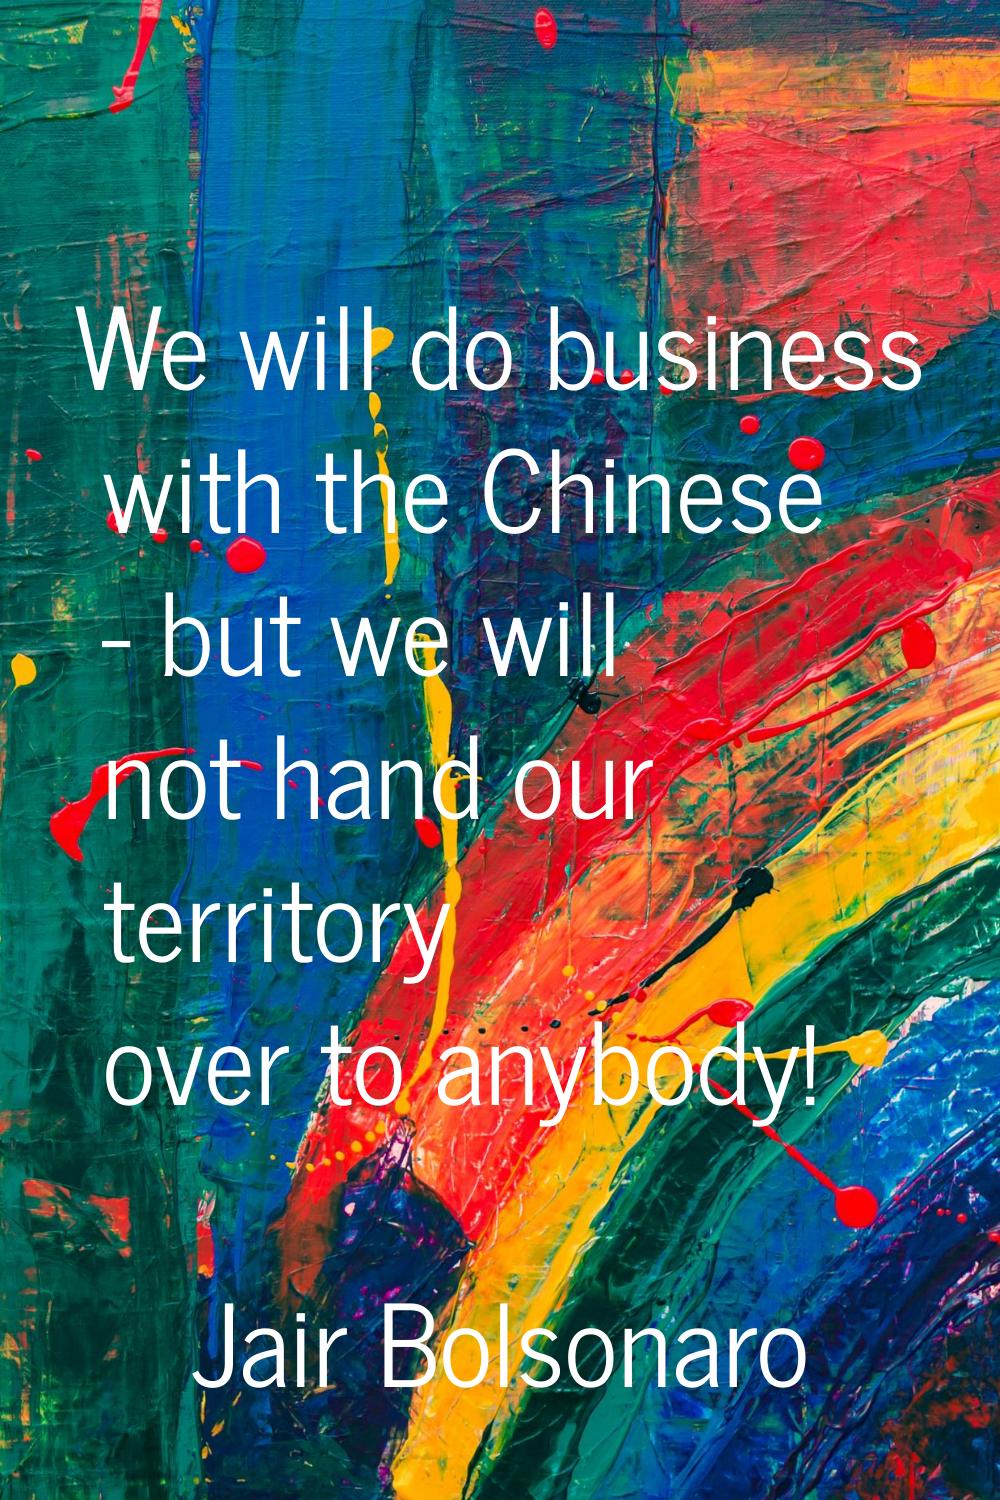 We will do business with the Chinese - but we will not hand our territory over to anybody!